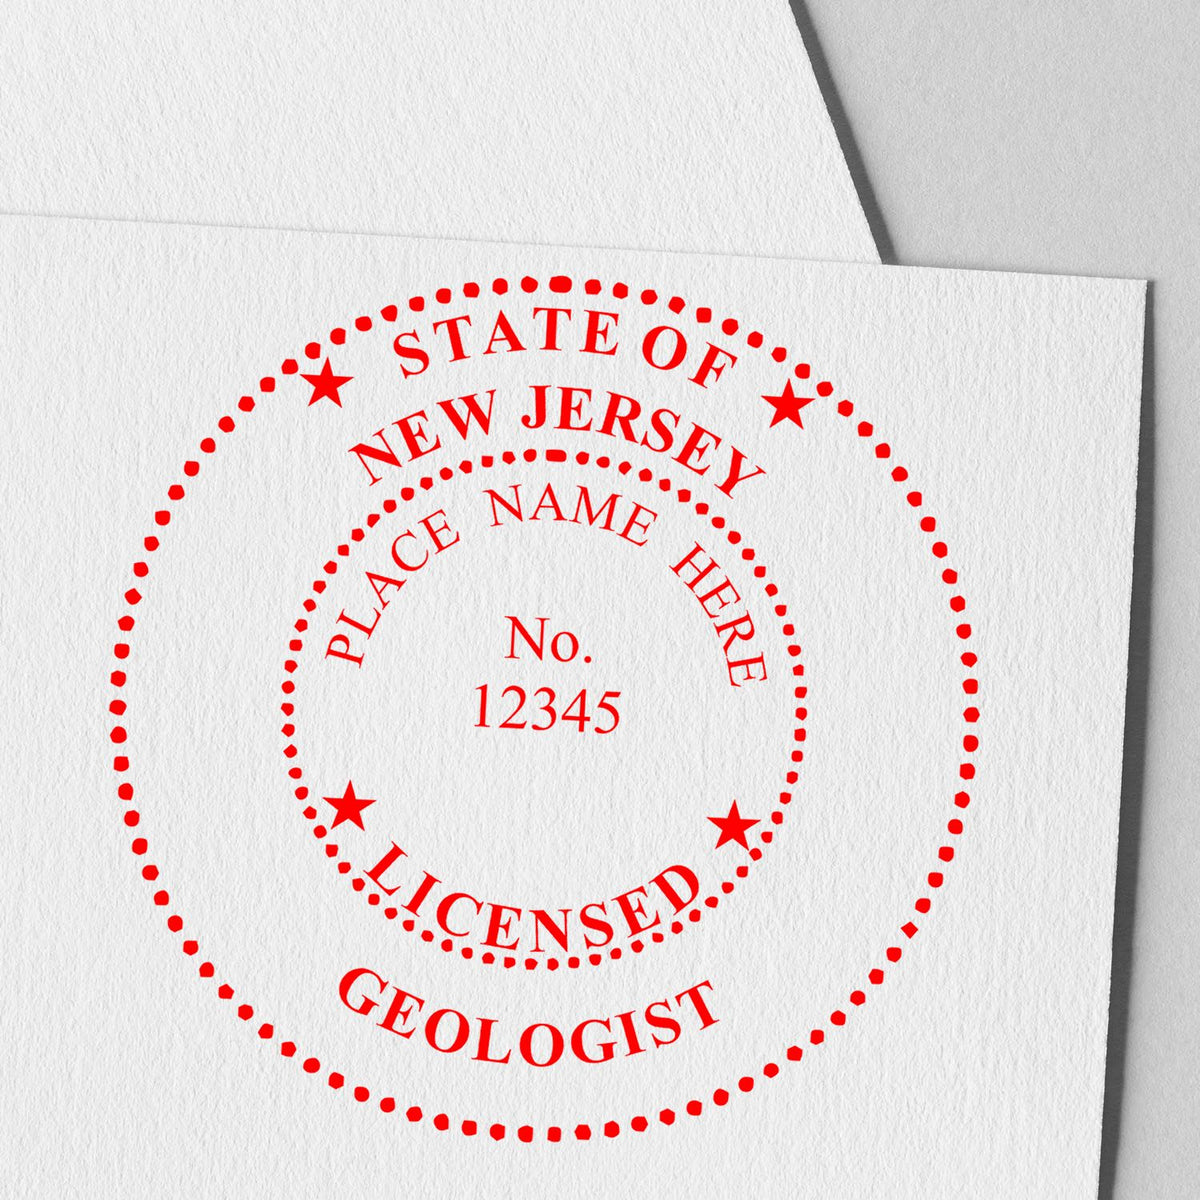 The Digital New Jersey Geologist Stamp, Electronic Seal for New Jersey Geologist stamp impression comes to life with a crisp, detailed image stamped on paper - showcasing true professional quality.